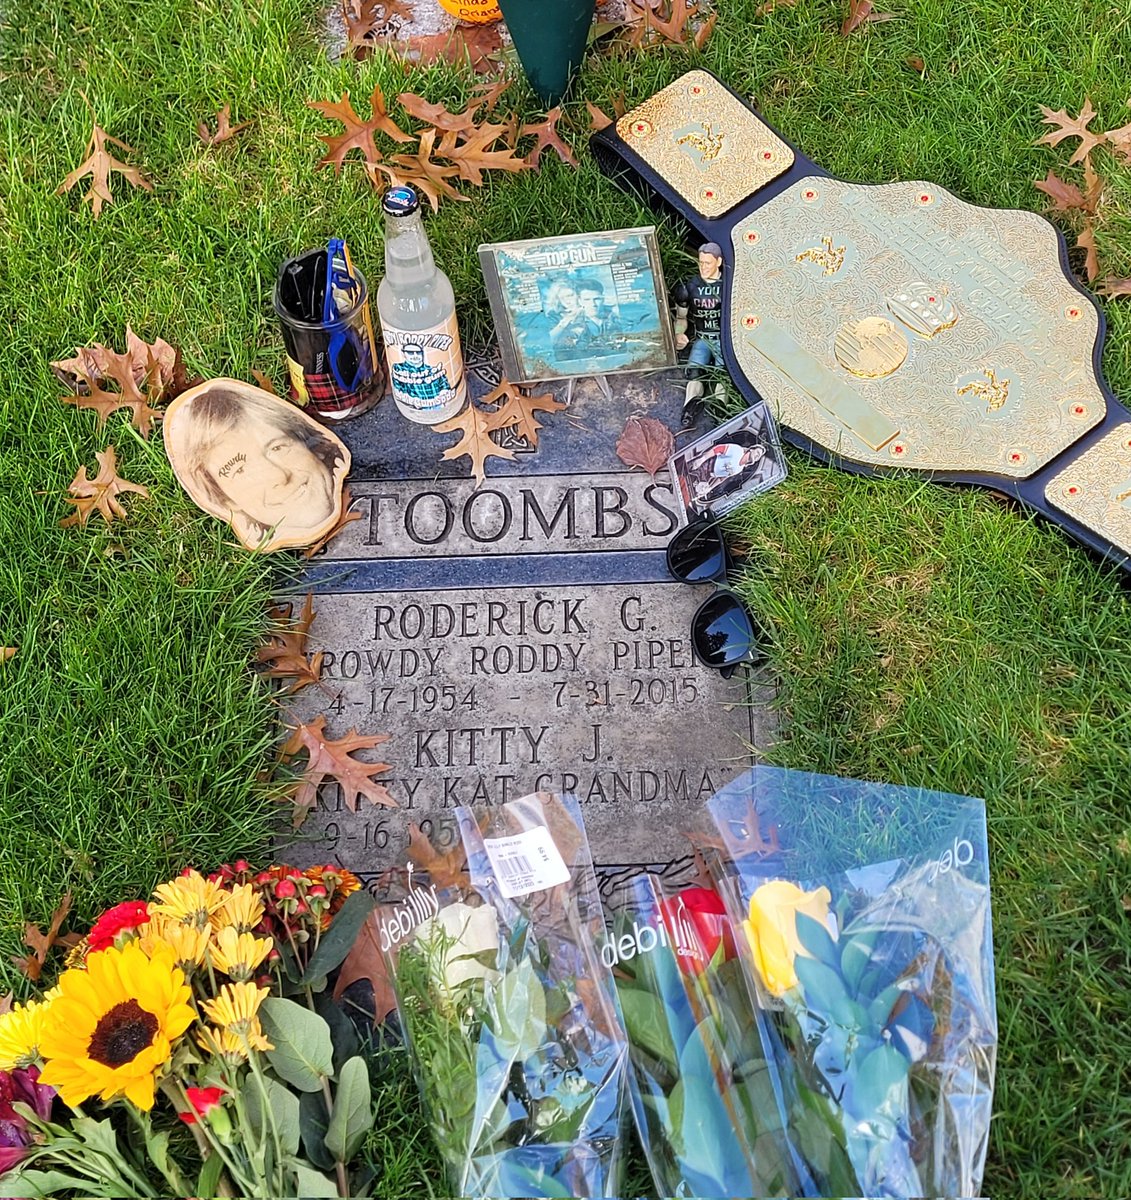 Got to visit Hot Rod @R_Roddy_Piper. R.I.P. my friend and you are truly missed.
#RowdyRoddyPiper #RIPRoddyPuper